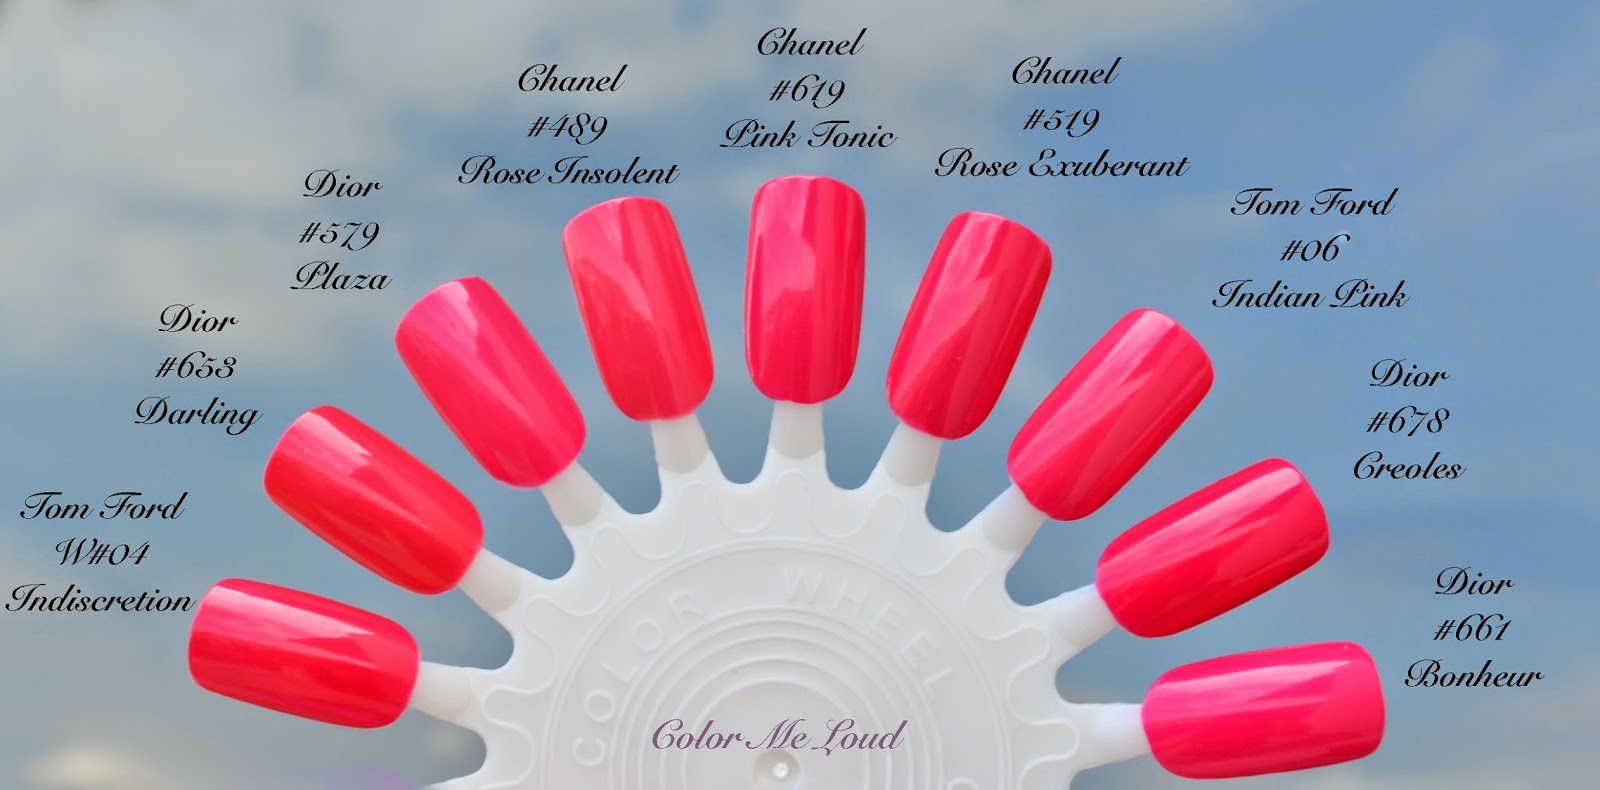 Chanel comparisons middle & pinkie fingers: #537 Riviera vs index & ring  fingers: #571 Fracas